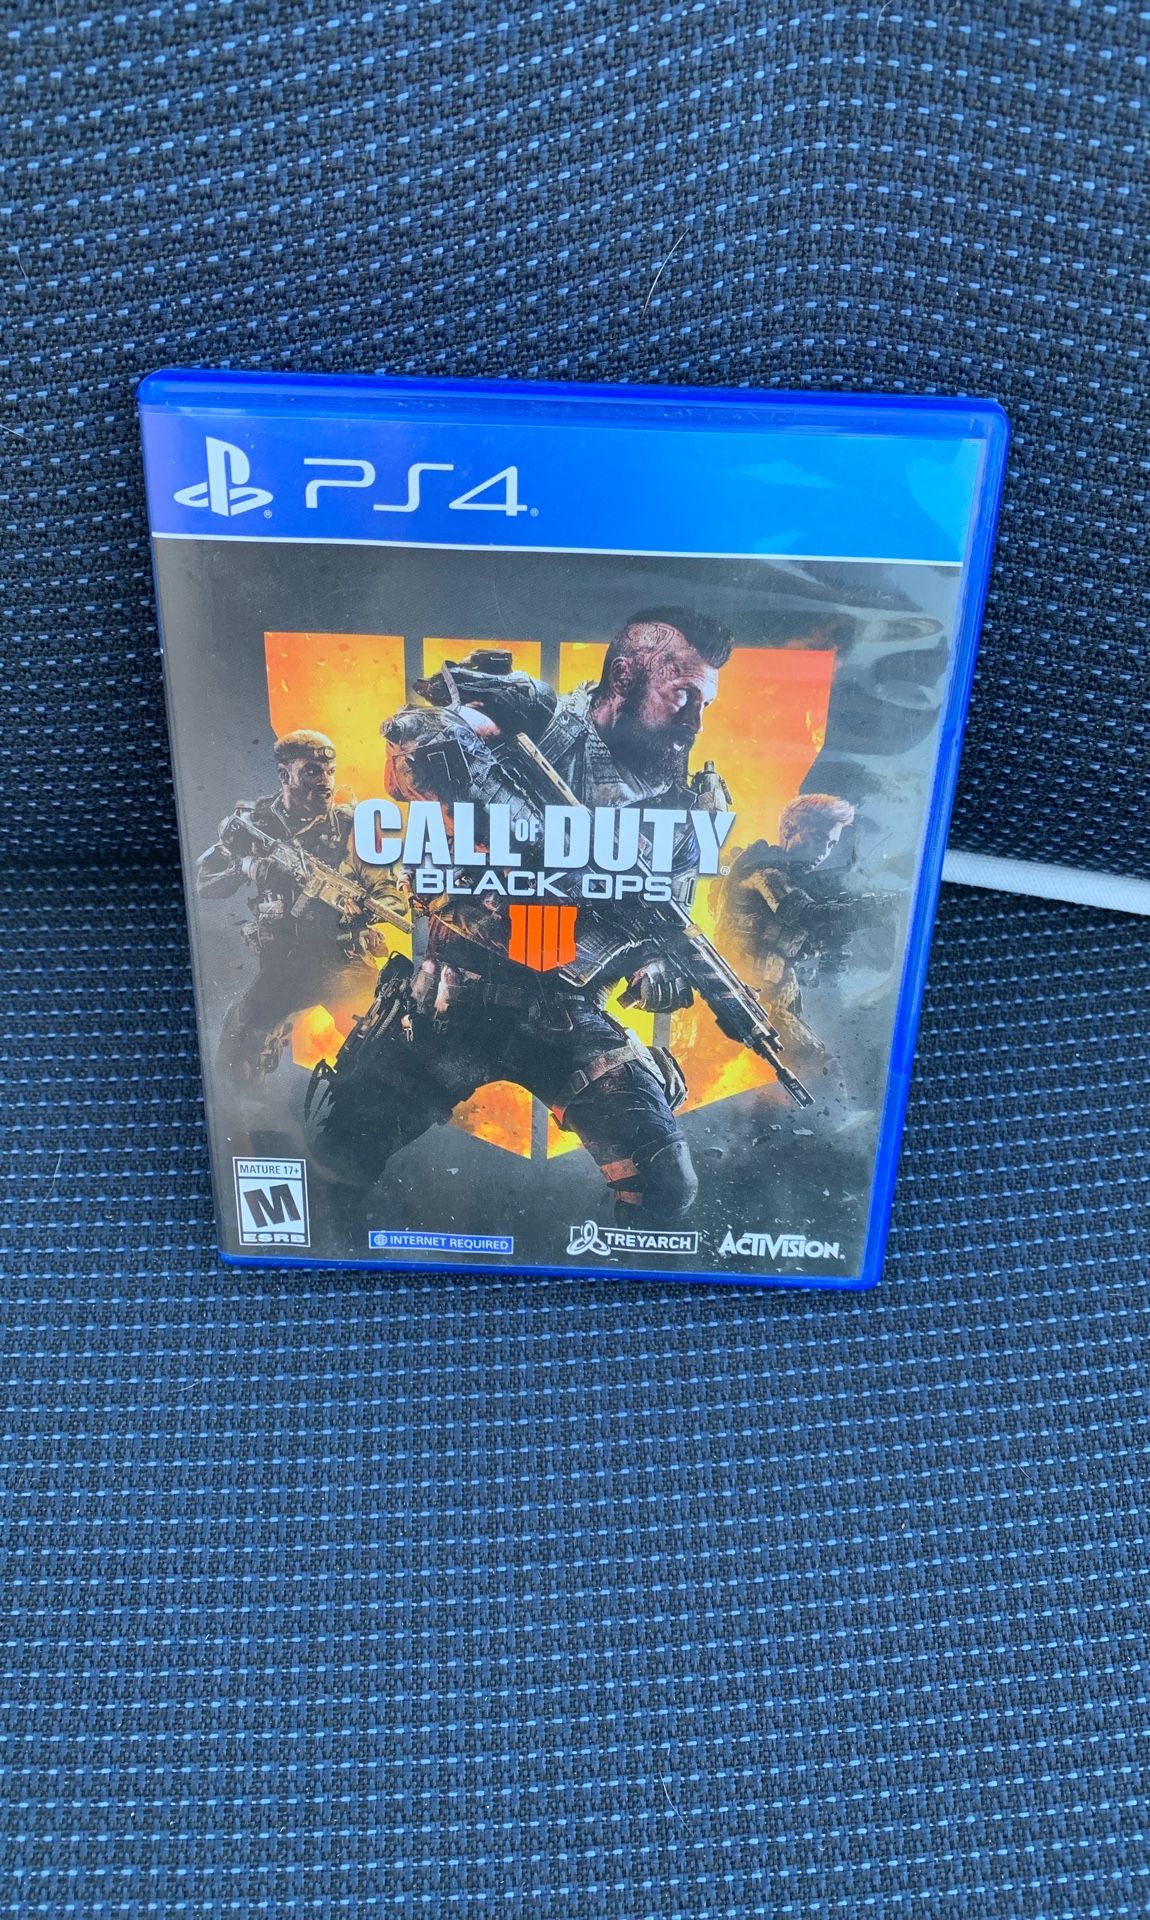 Call of duty: Black ops 4 for PlayStation